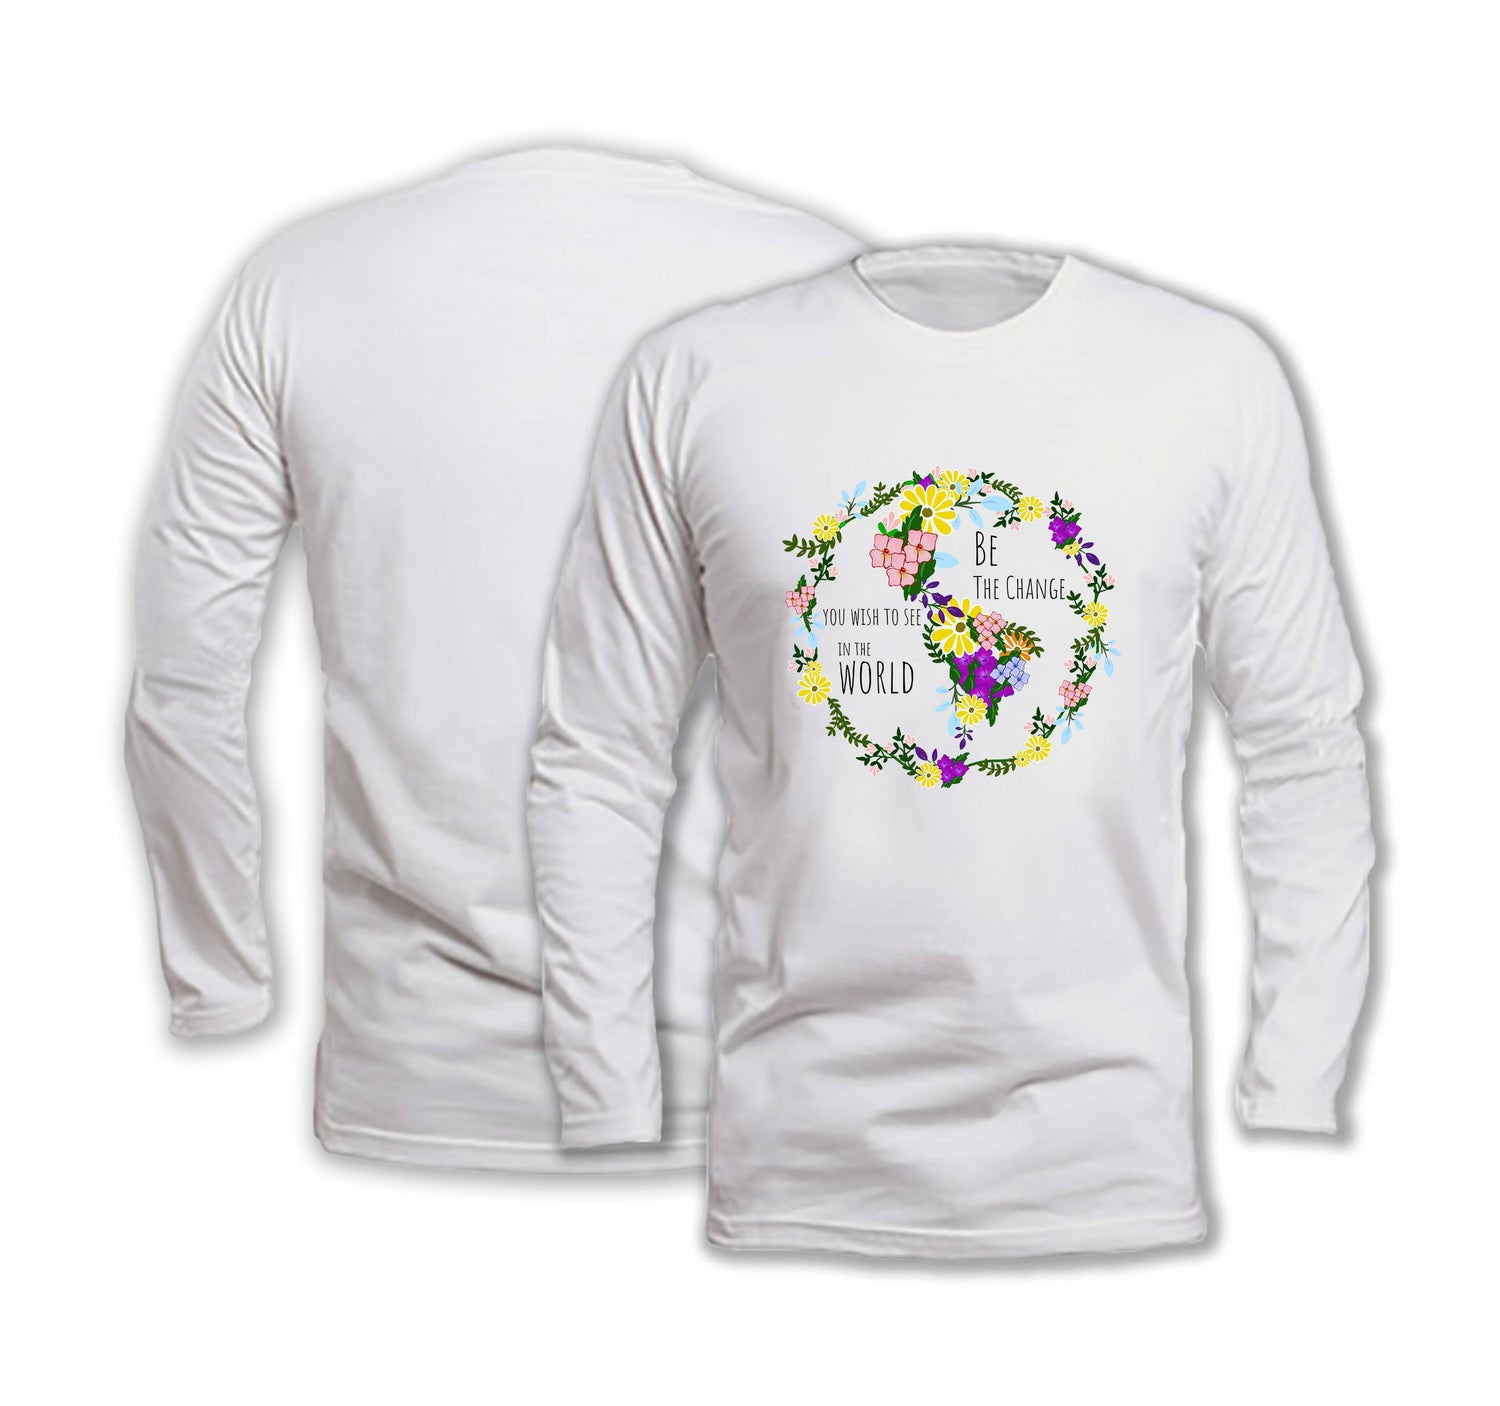 Be The Change - Long Sleeve Organic Cotton T-Shirt - One Choice Apparel